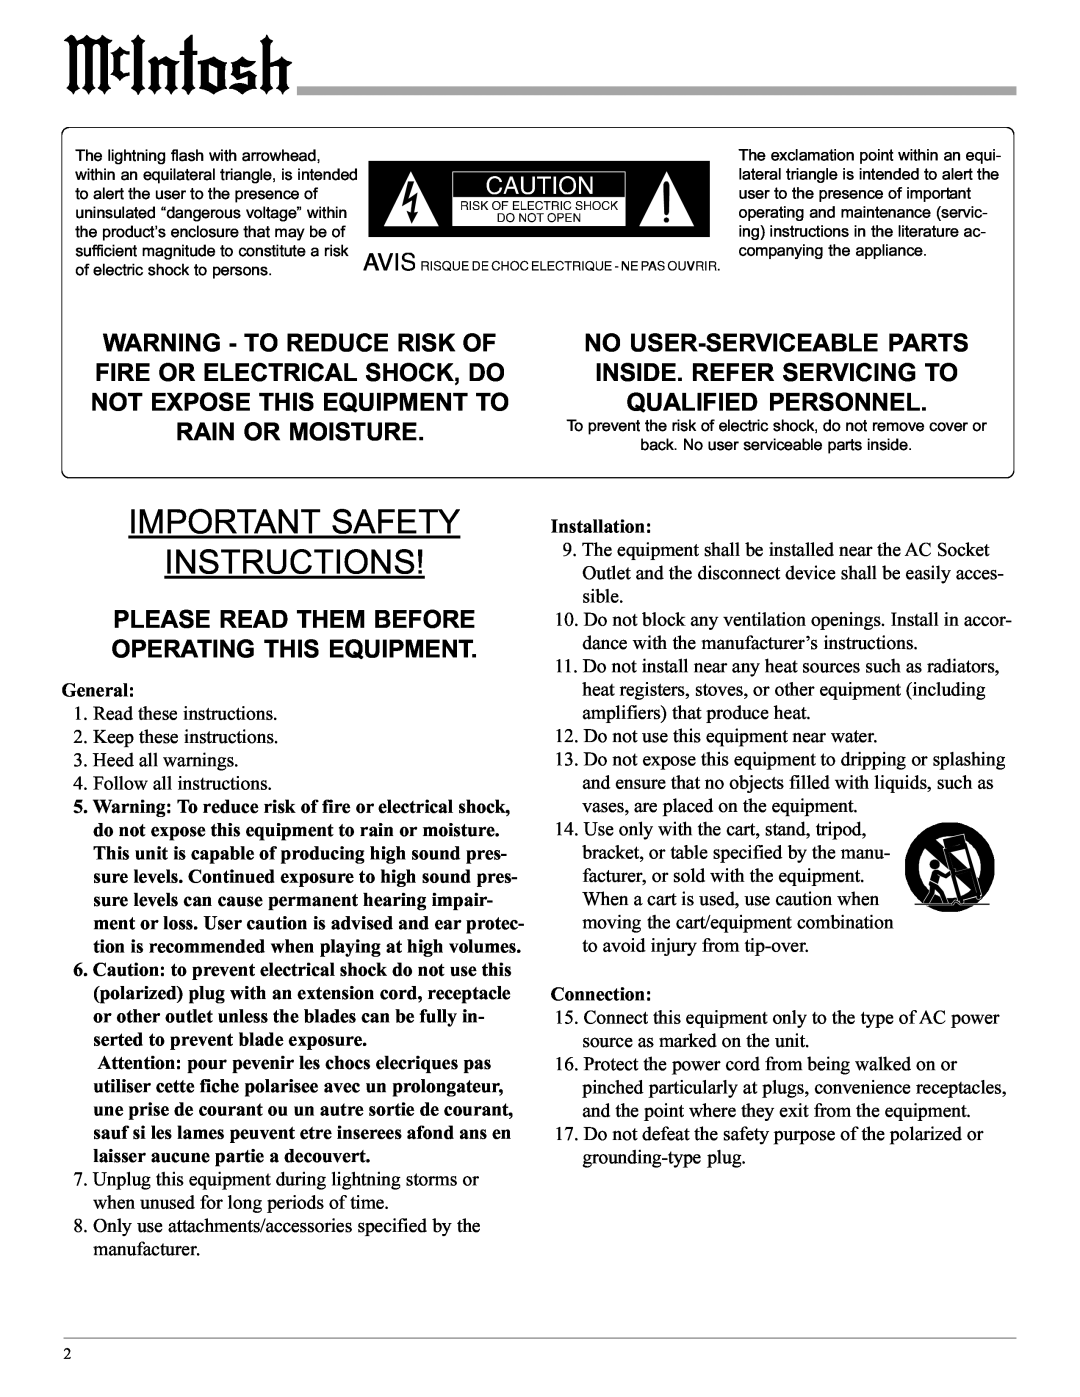 McIntosh MA6900 manual Important Safety Instructions, Please Read Them Before Operating This Equipment 